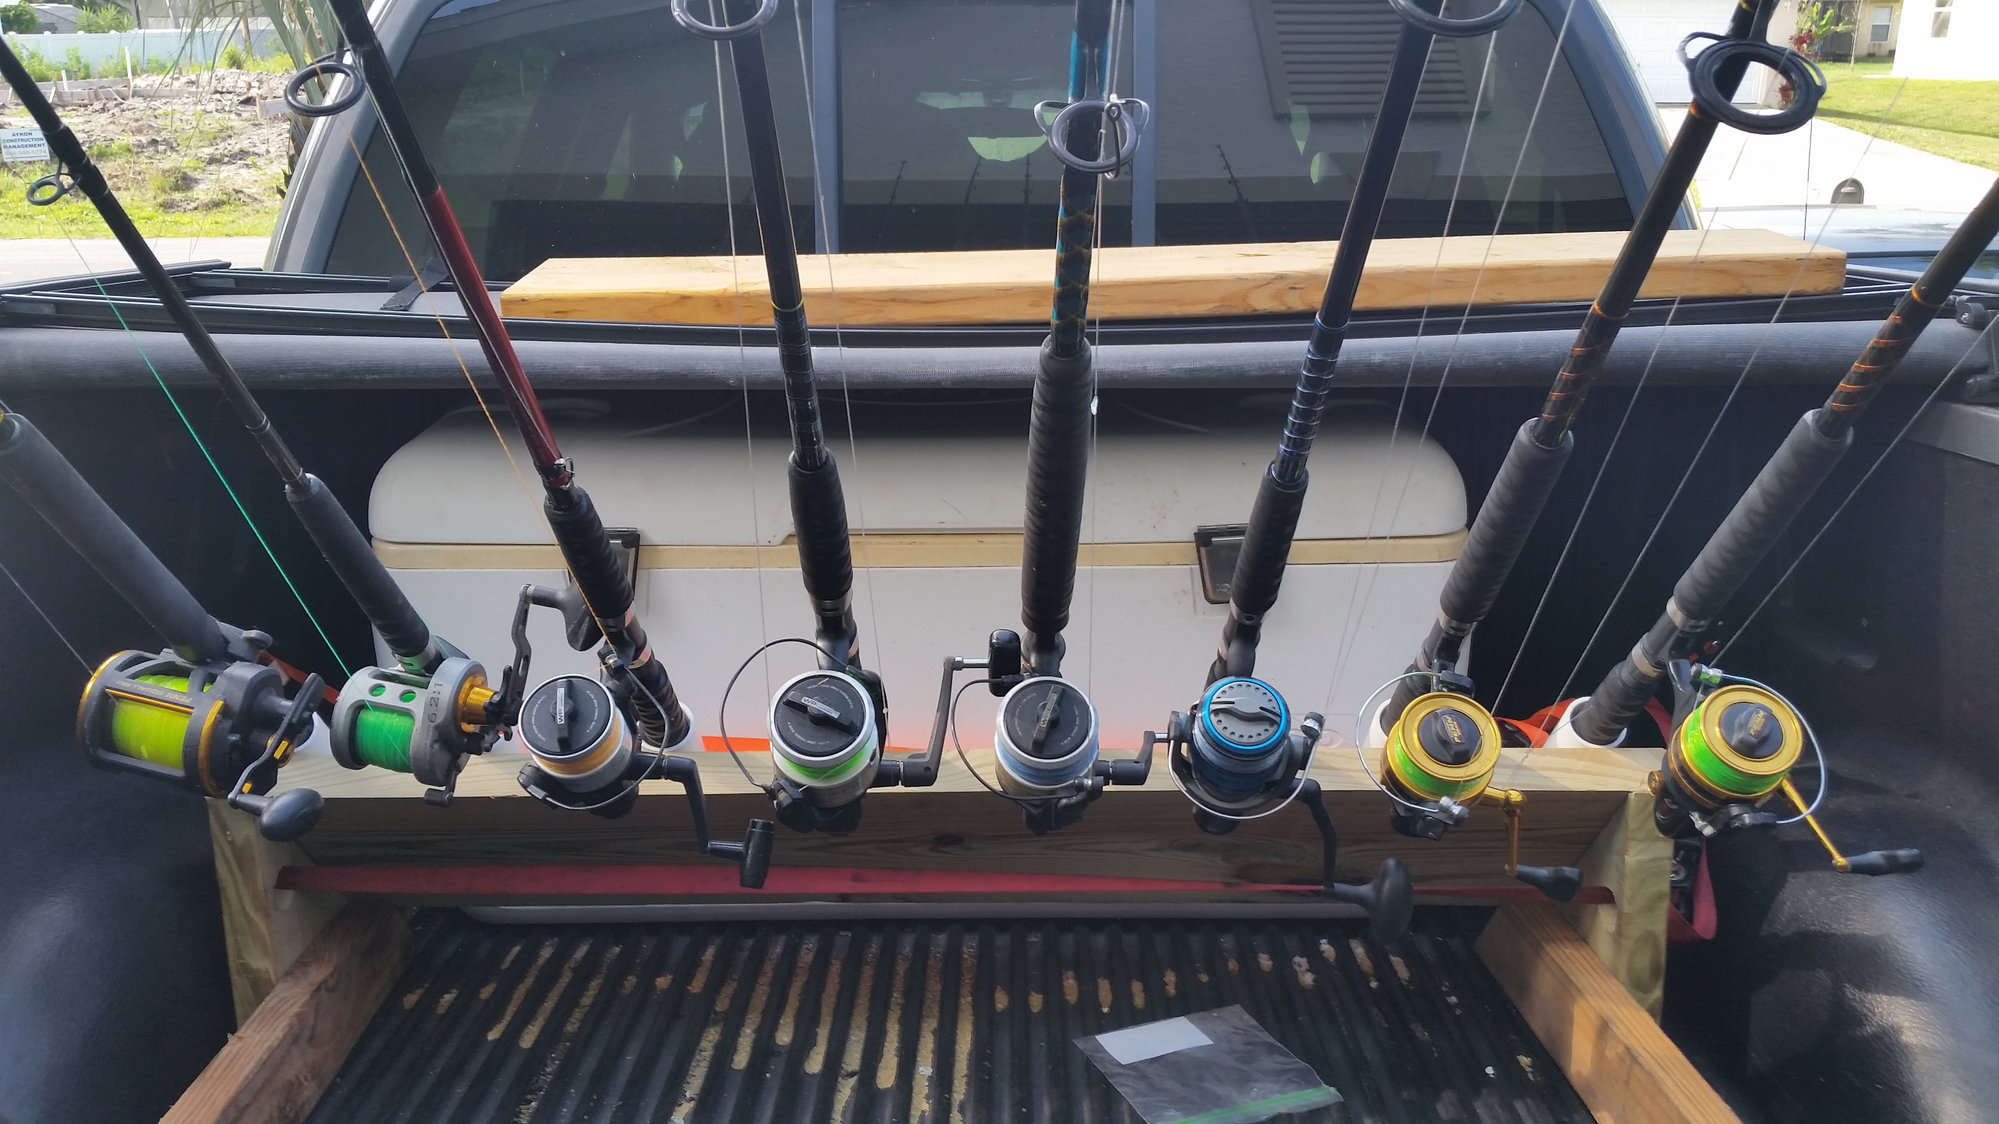 Truck bed rod holder - The Hull Truth - Boating and Fishing Forum